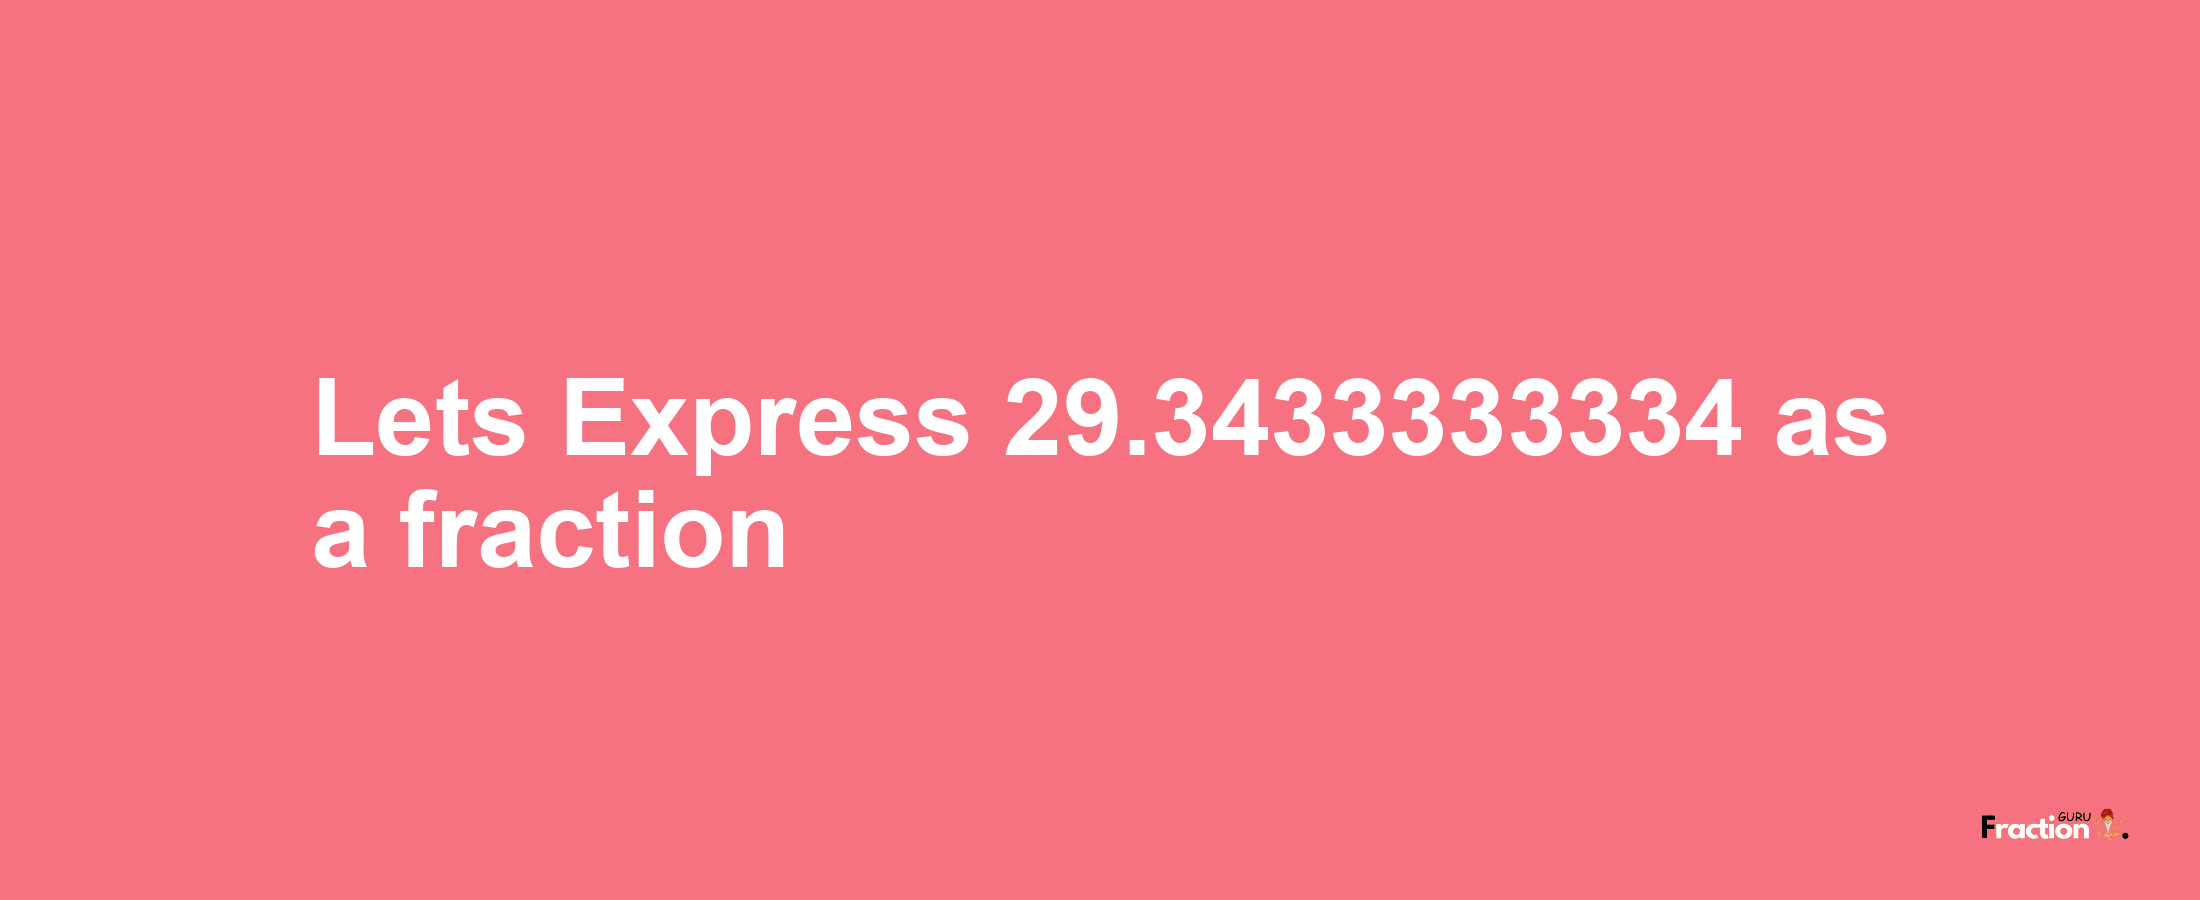 Lets Express 29.3433333334 as afraction